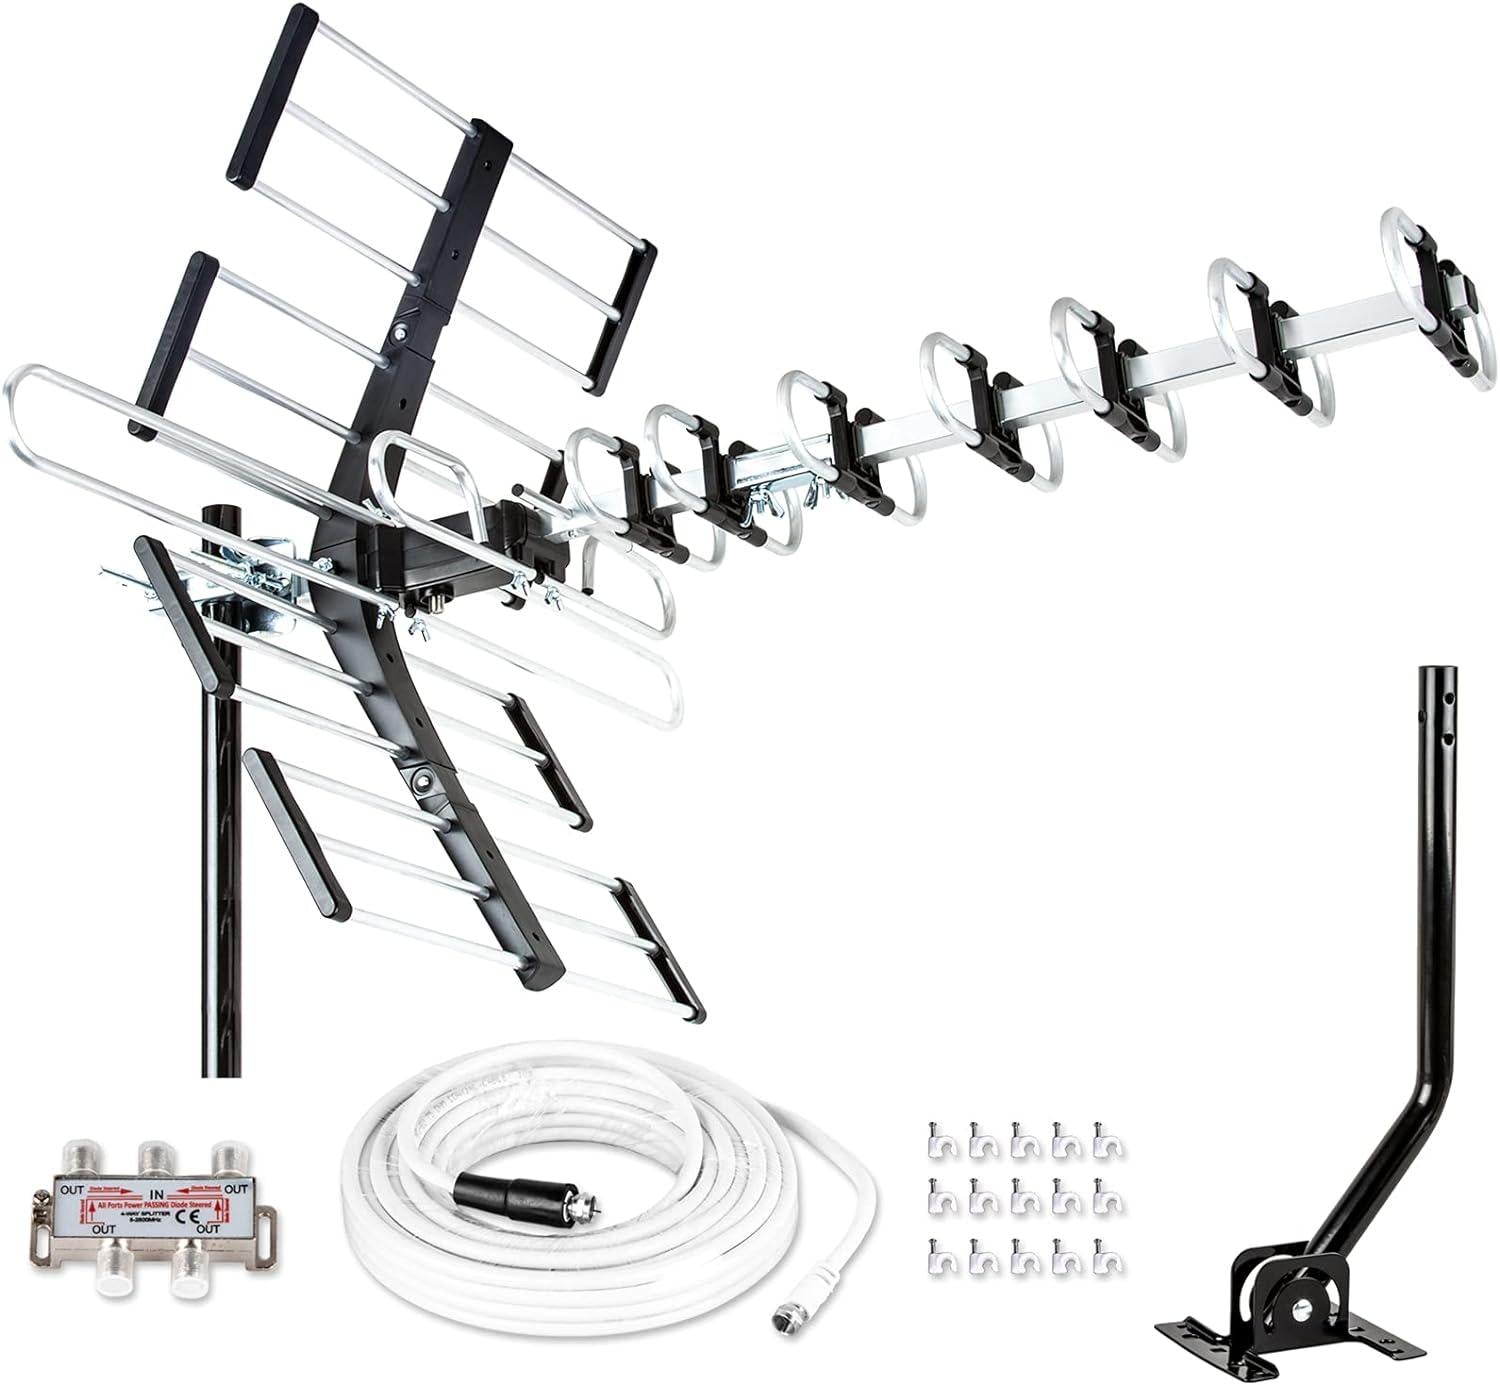 [Newest 2021] Five Star Outdoor HDTV Antenna up to 200 Mile Long Range, Attic or Roof Mount TV Antenna, Long Range Digital OTA Antenna for 4K 1080P VHF UHF Supports 4 TVs Installation Kit and J Mount